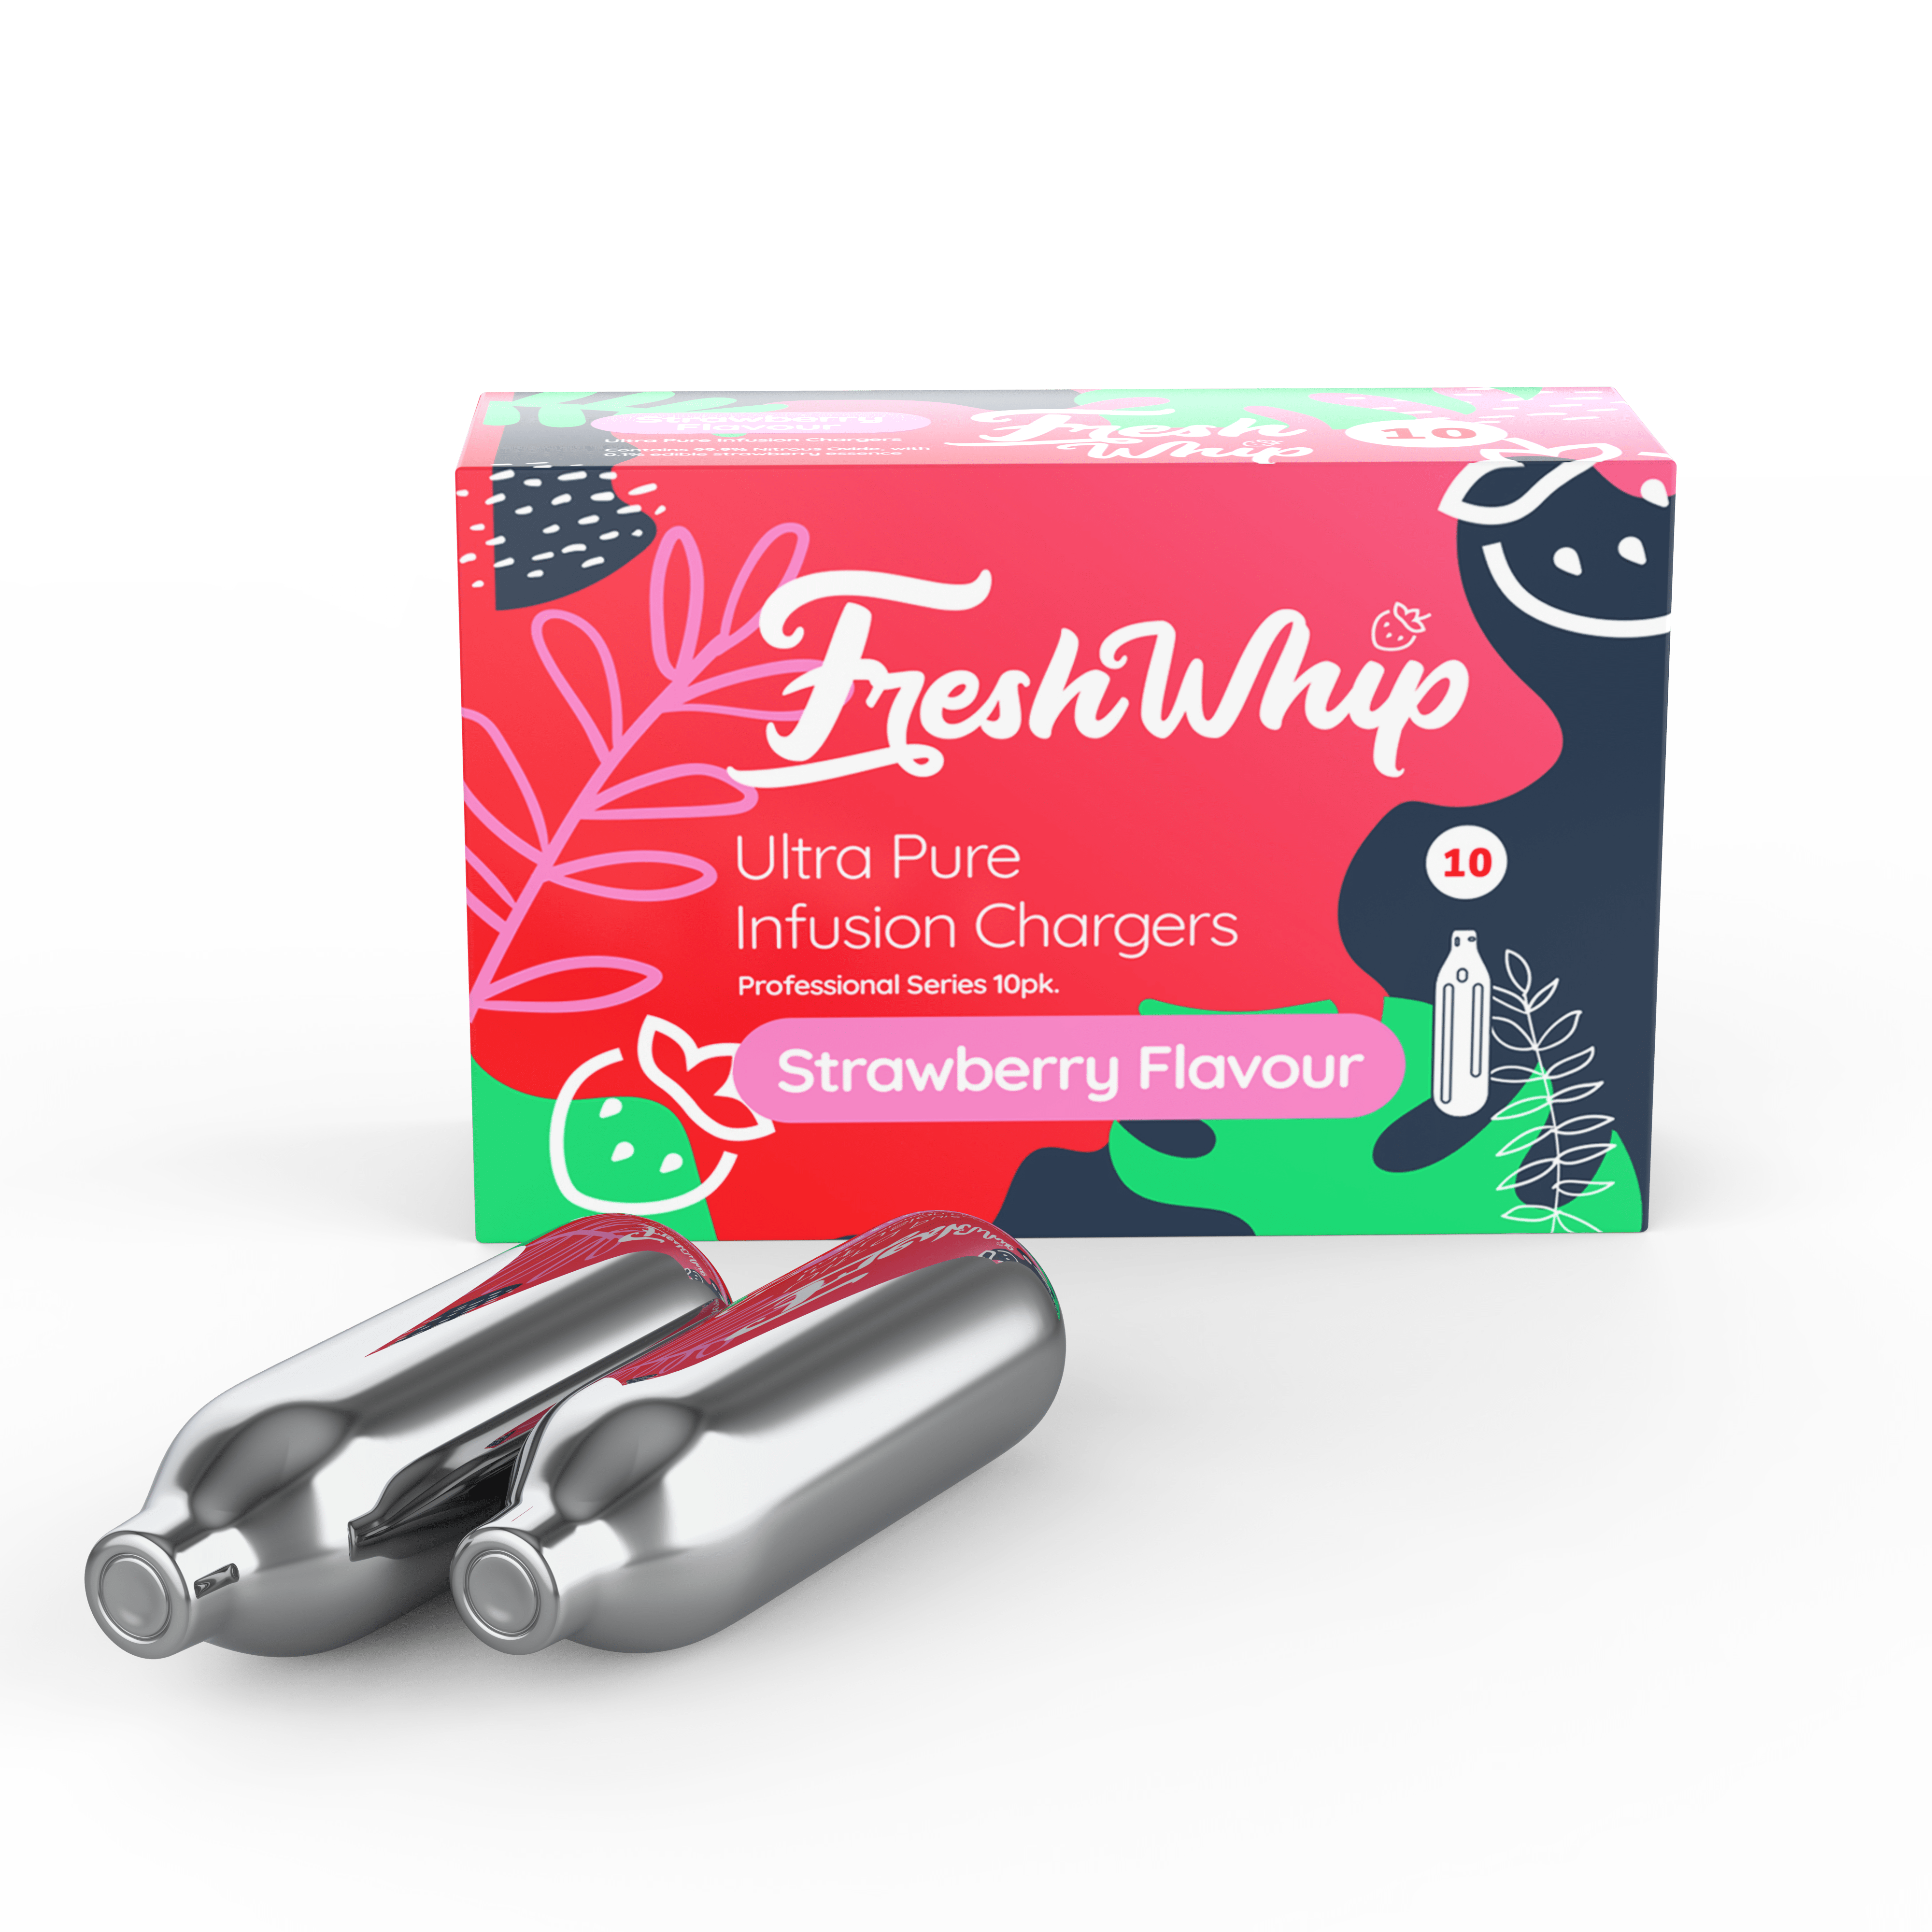 Wholesale FreshWhip STRAWBERRY Infusion Chargers 8.2g – 10pks